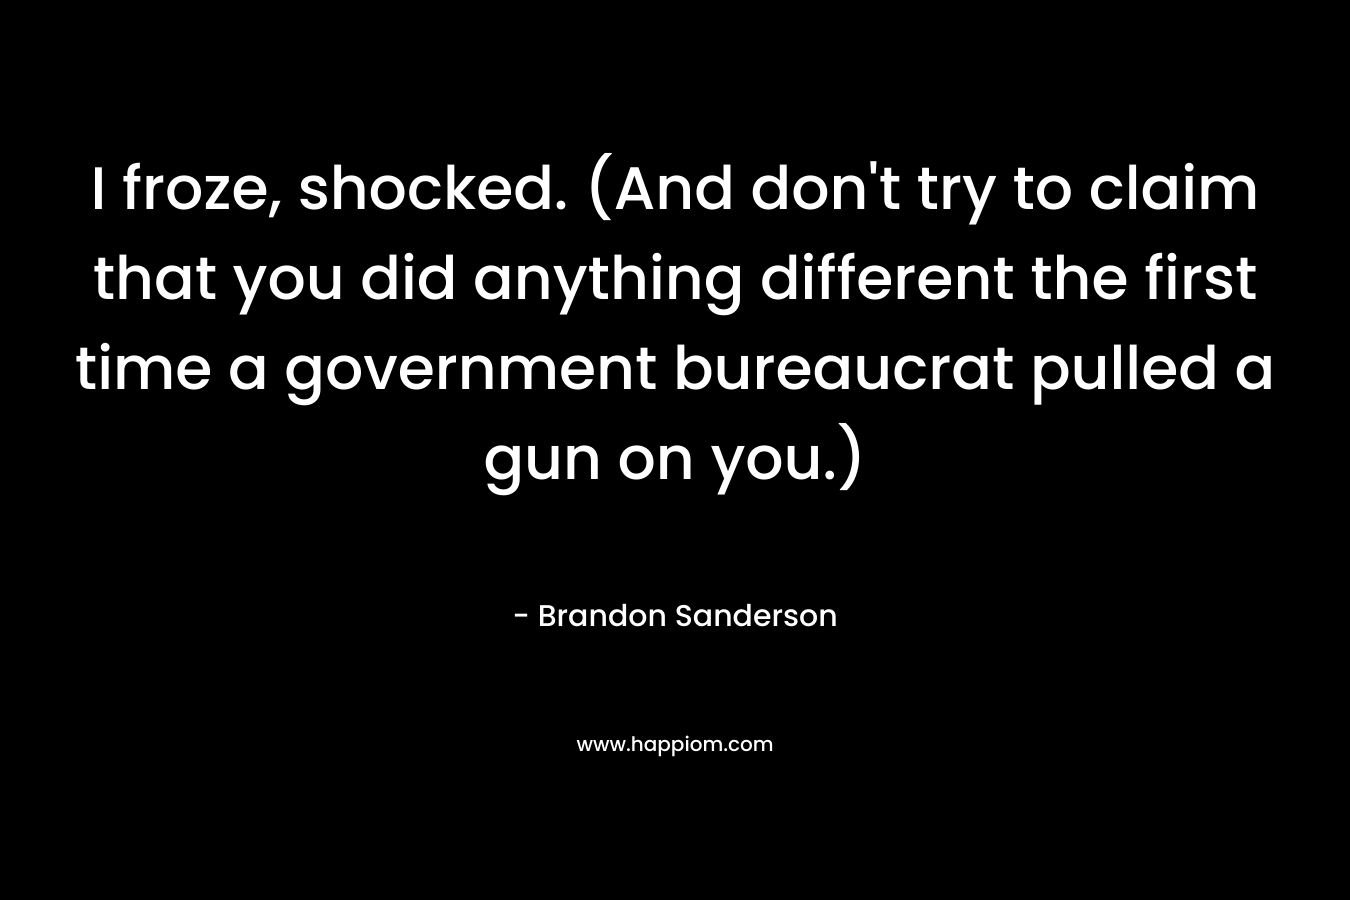 I froze, shocked. (And don’t try to claim that you did anything different the first time a government bureaucrat pulled a gun on you.) – Brandon Sanderson